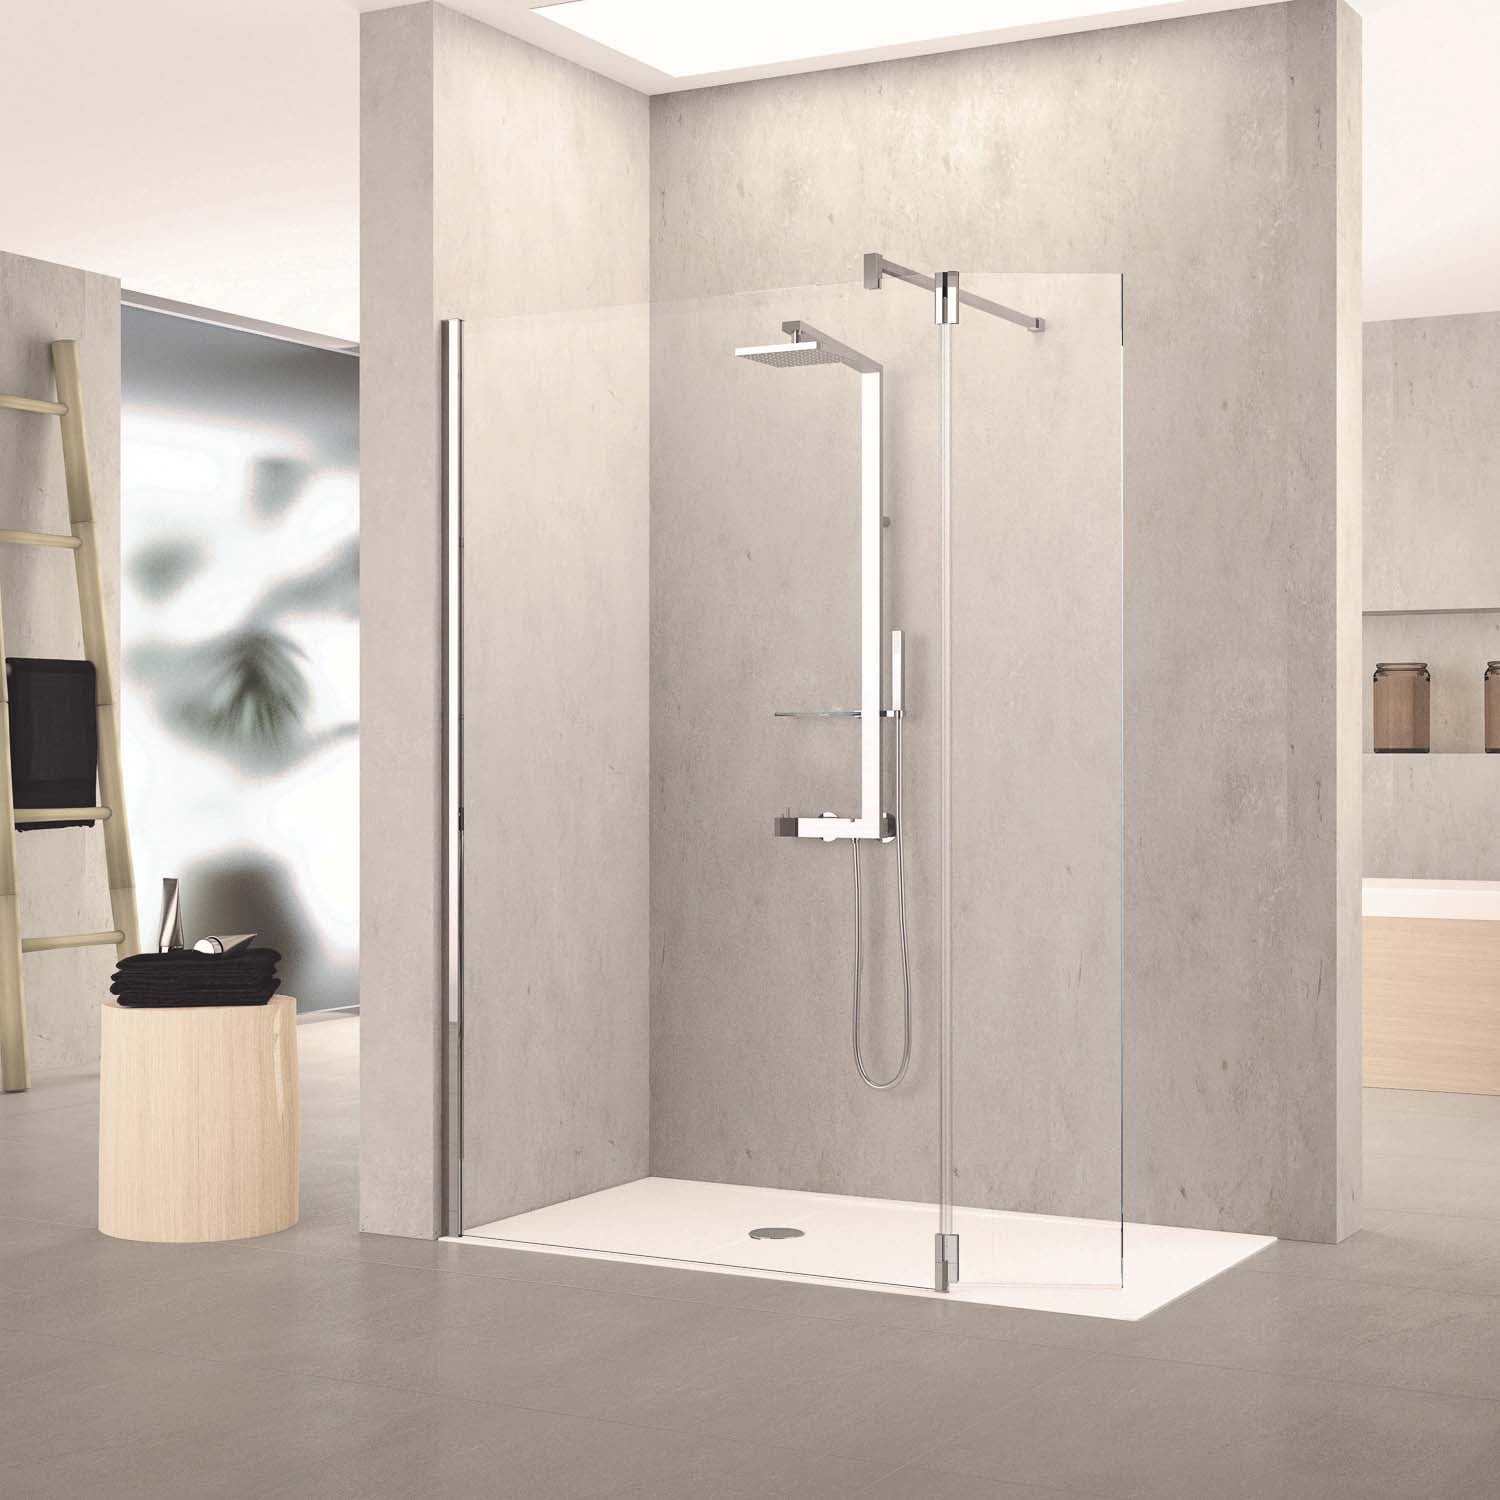 1170-1200mm Ergo Wet Room Screen Clear Glass with a chrome finish lifestyle image